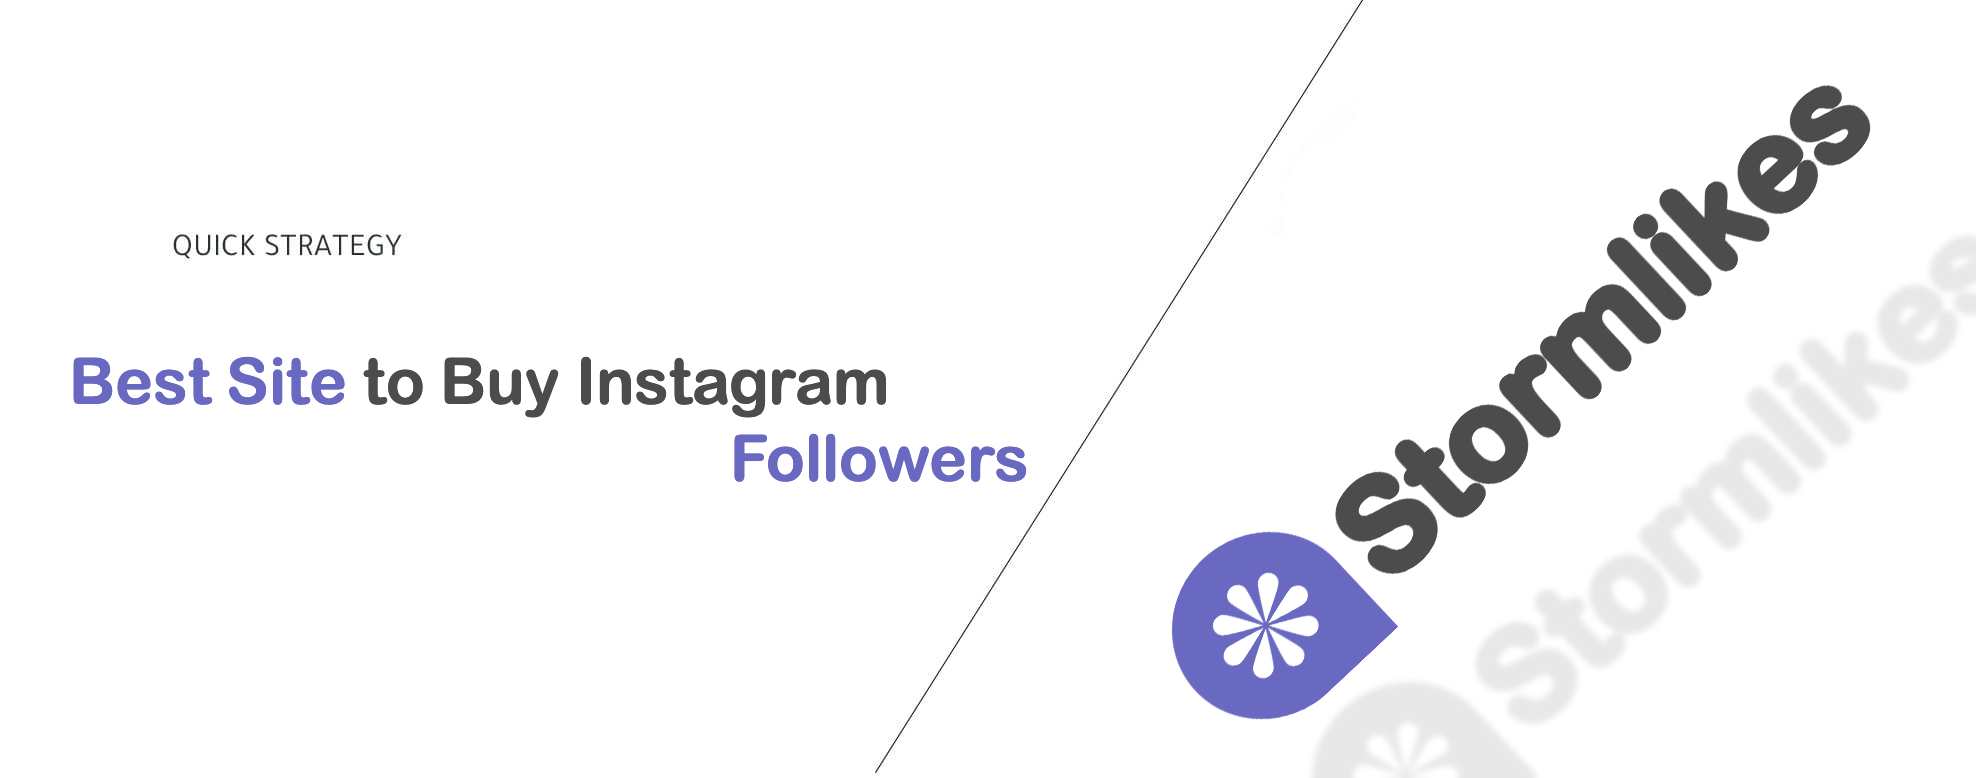 Considerations to Find the Best Site to Buy Instagram Followers